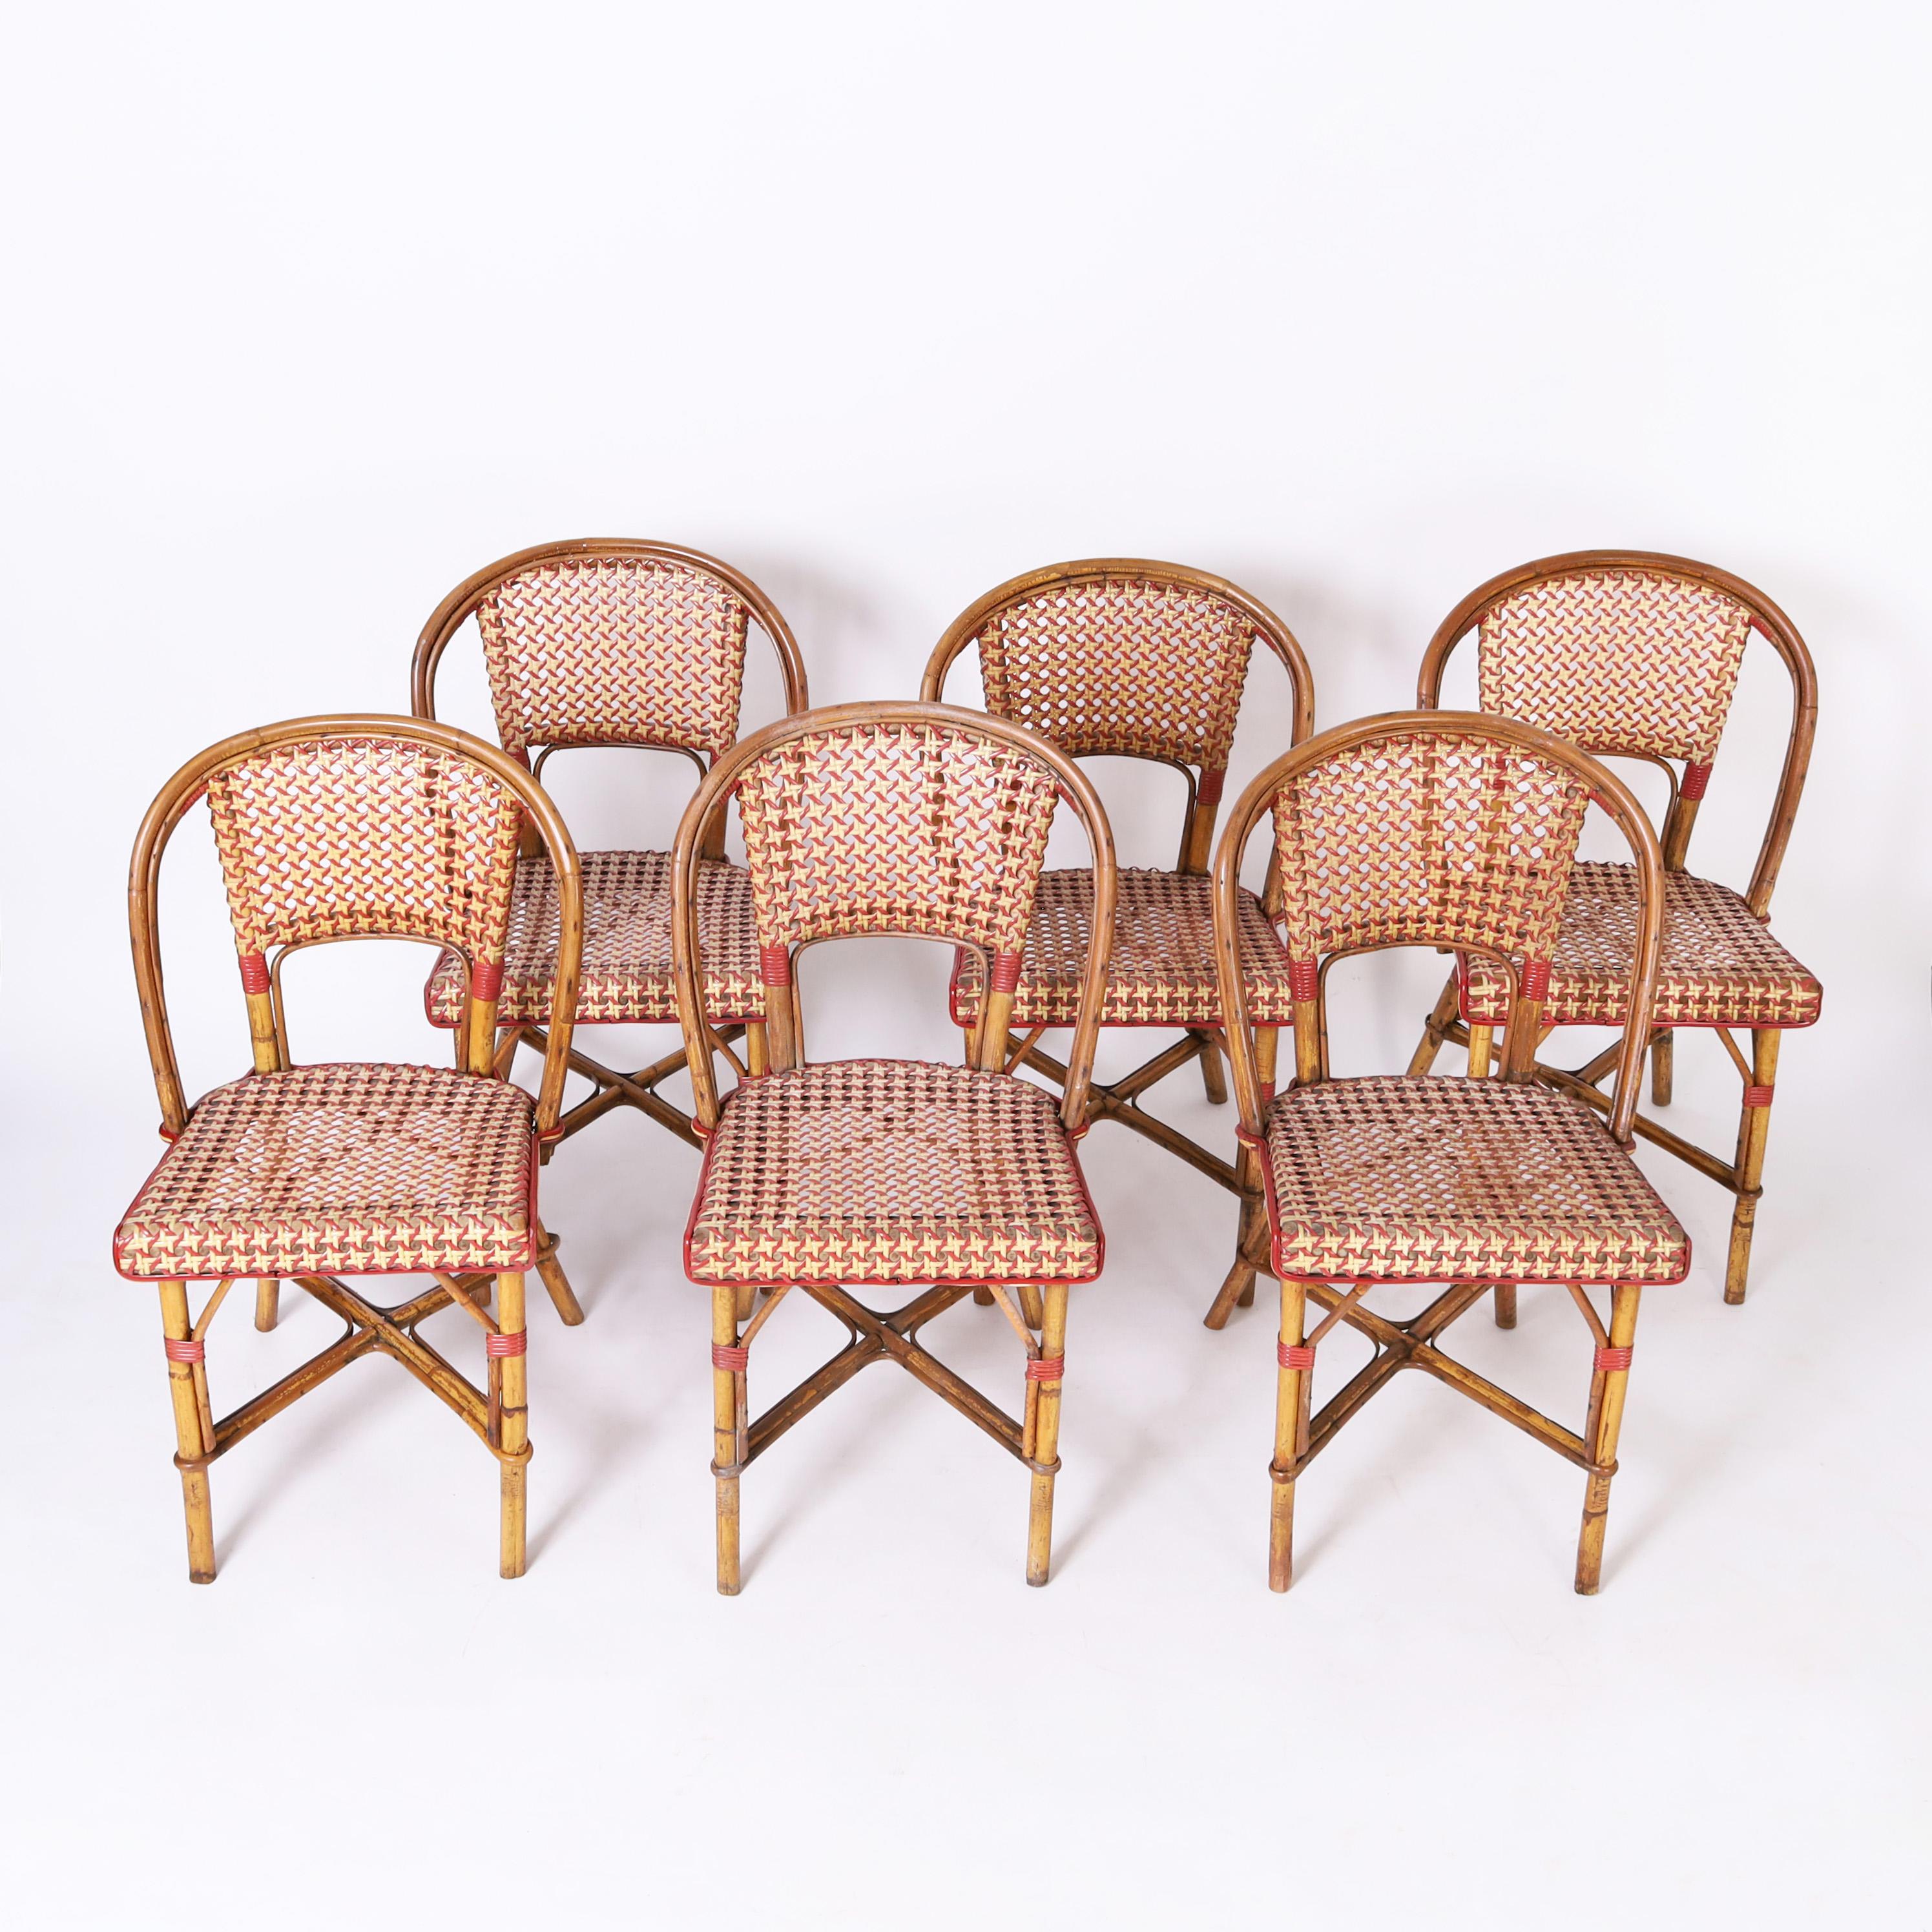 Charming set of six vintage French bistro chairs crafted in bamboo and bent bamboo with caned backs and seats decorated with painted reed highlights.